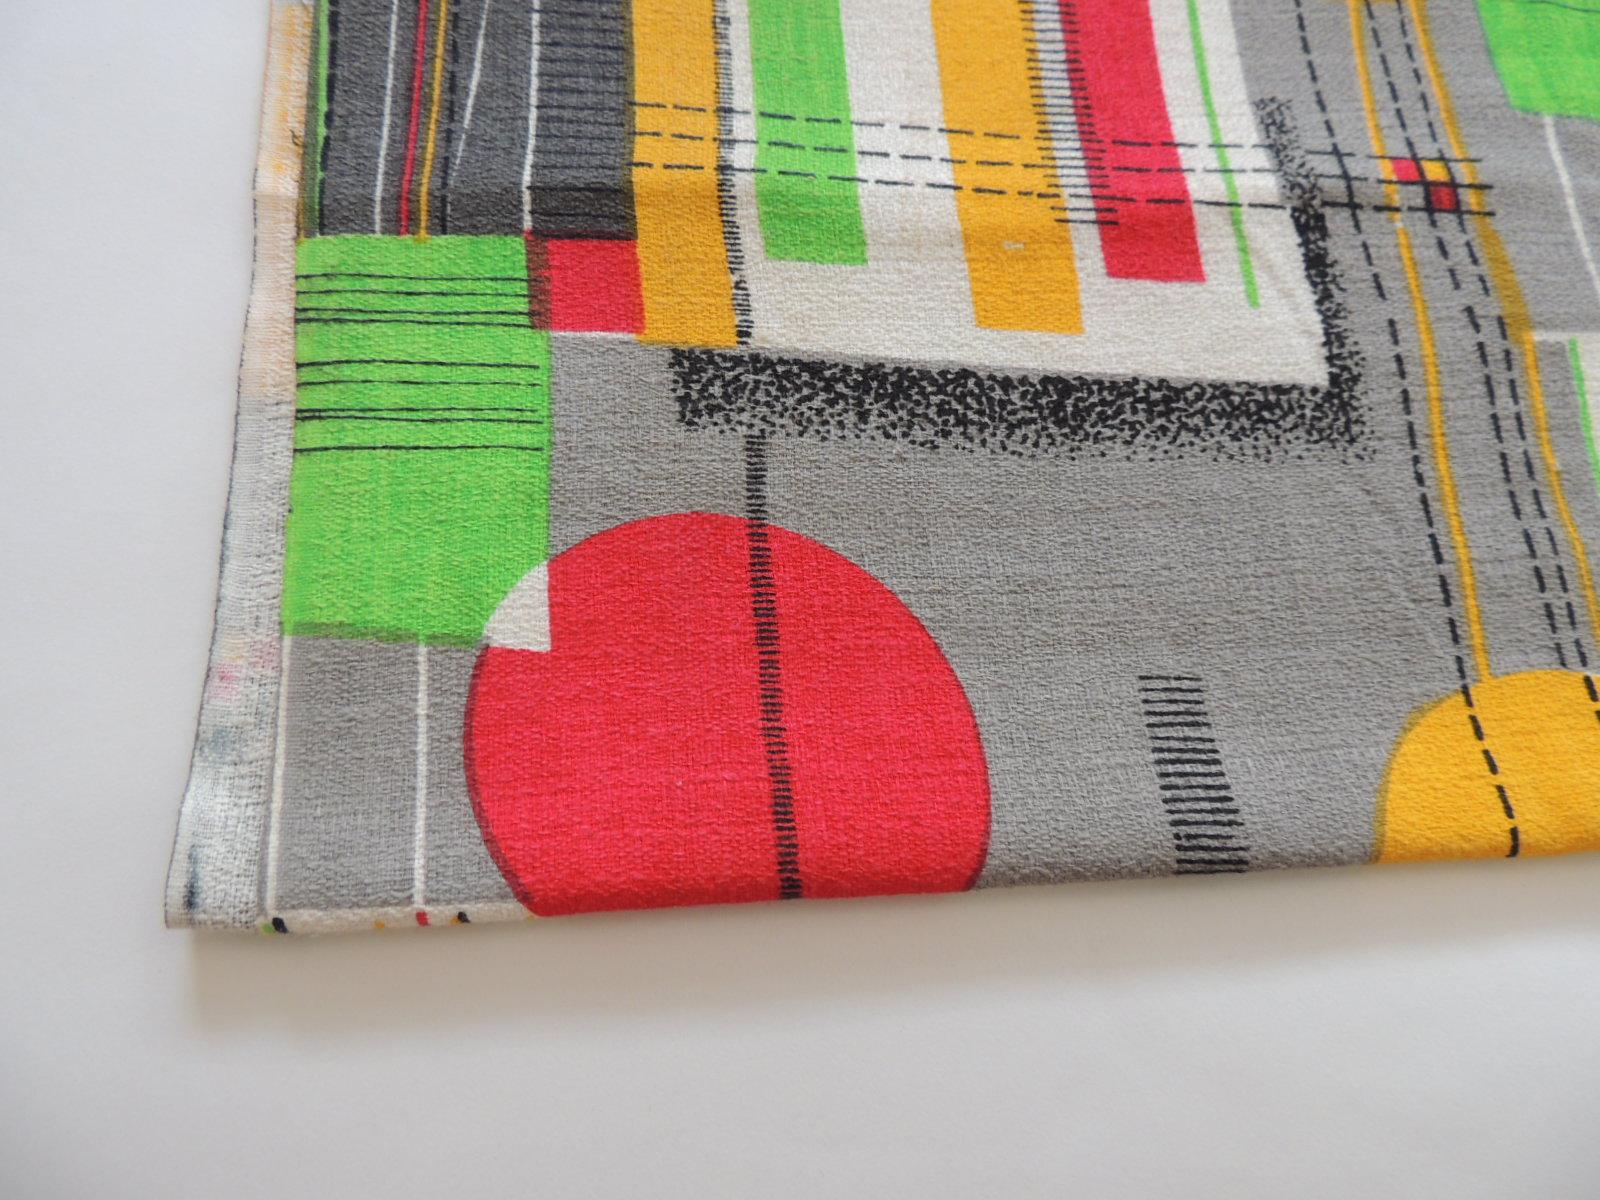 Fabric by the yard, printed cotton midcentury 